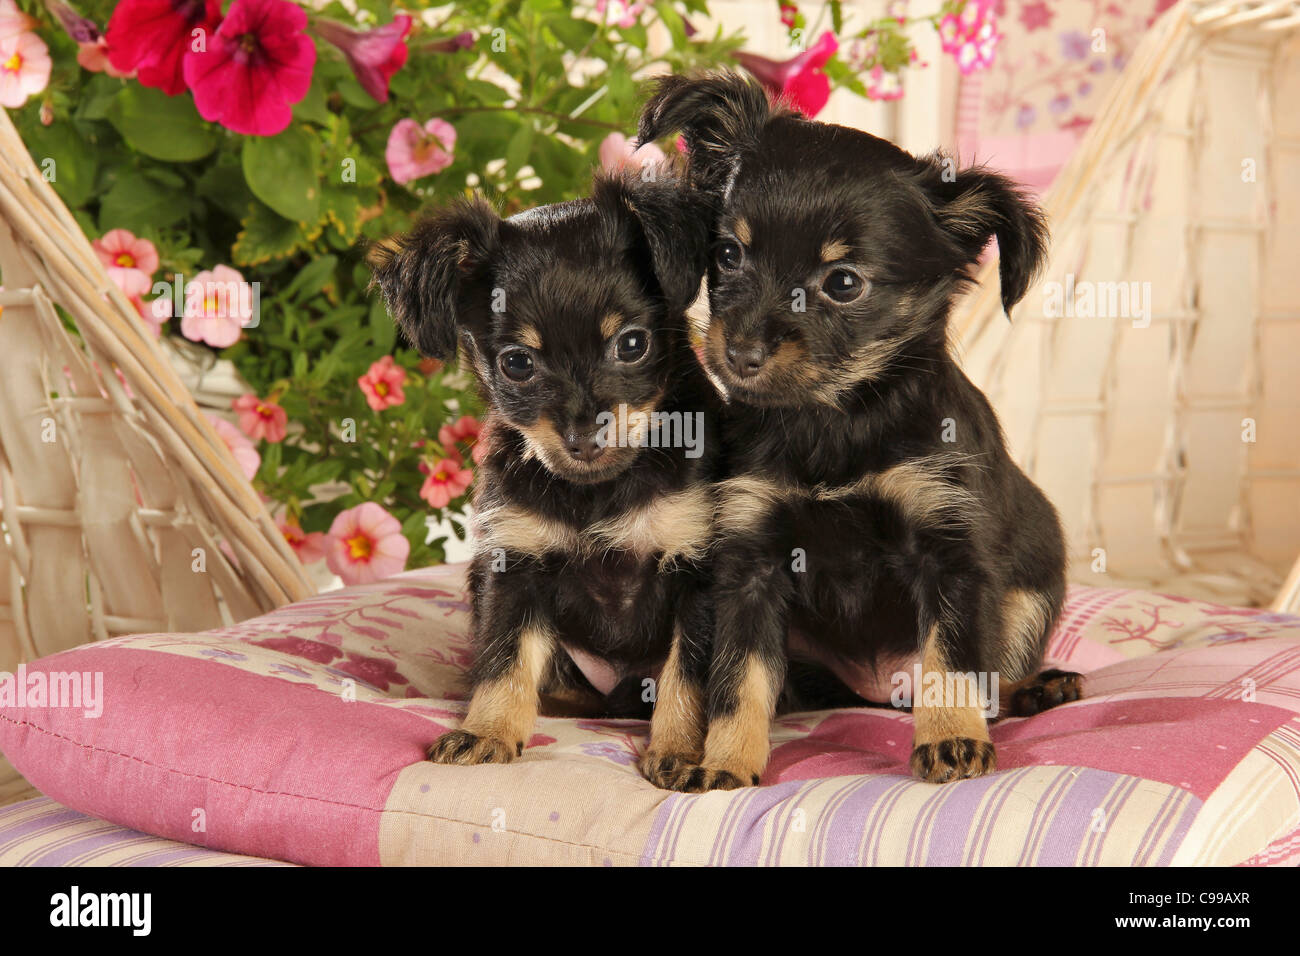 Russian Toy Terrier dog two puppies sitting Stock Photo